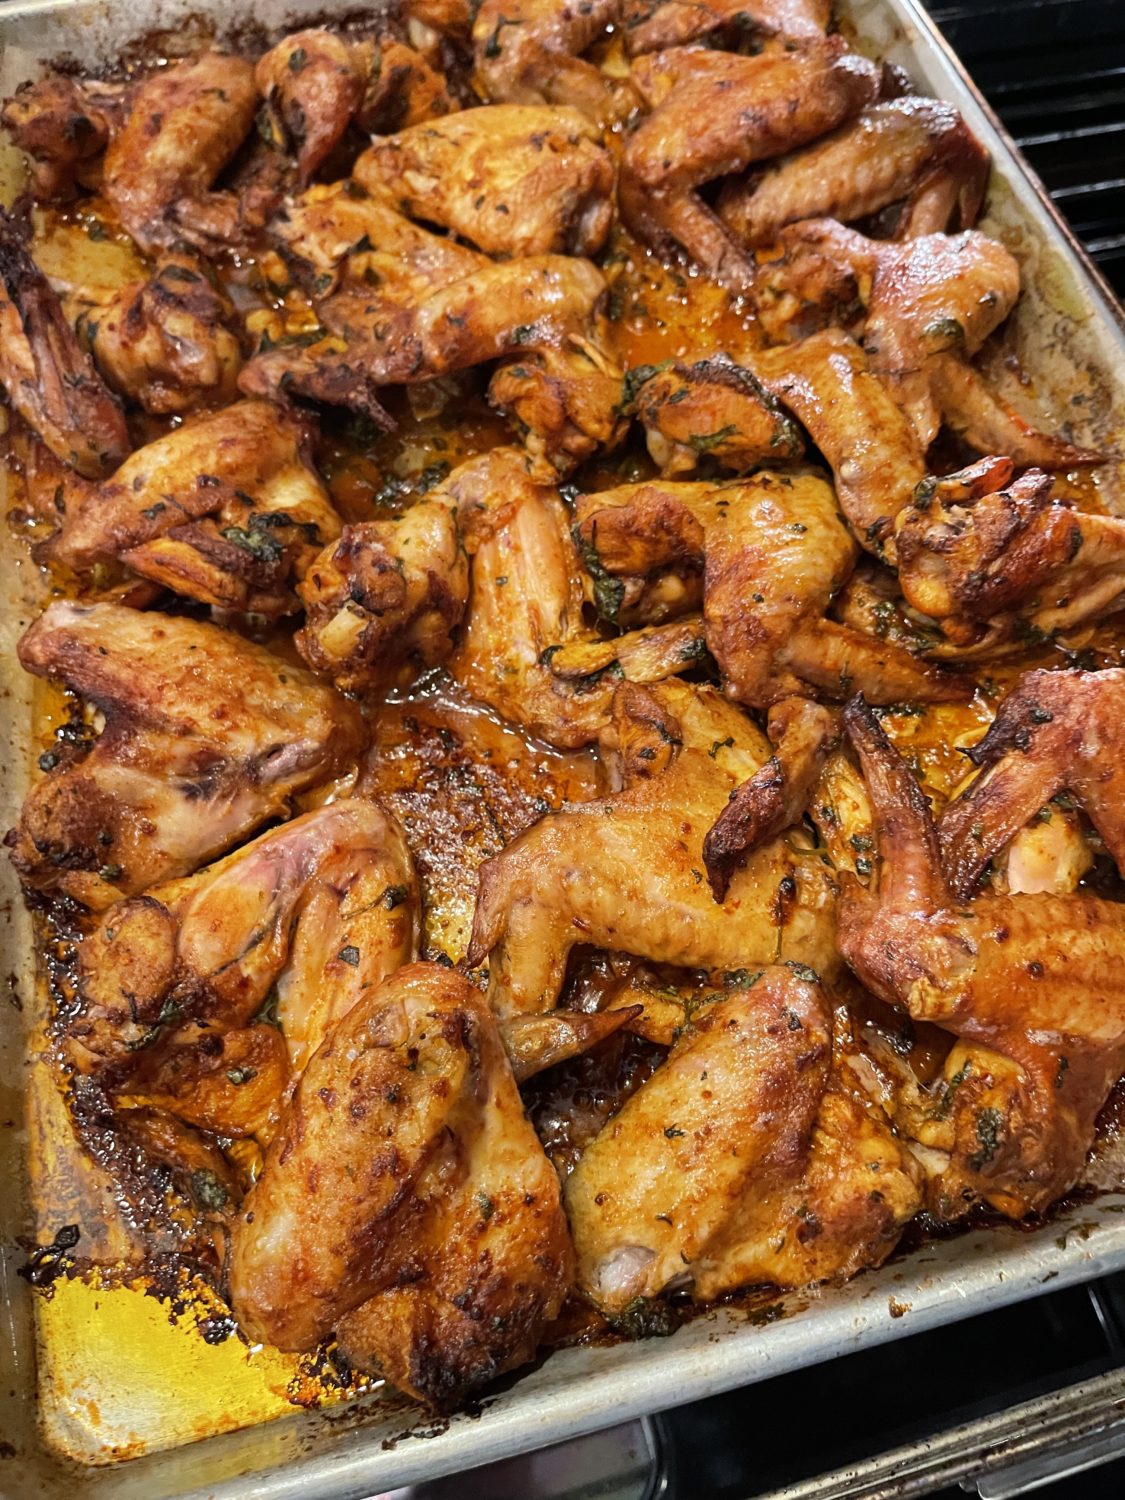 wings partially cooked in the oven